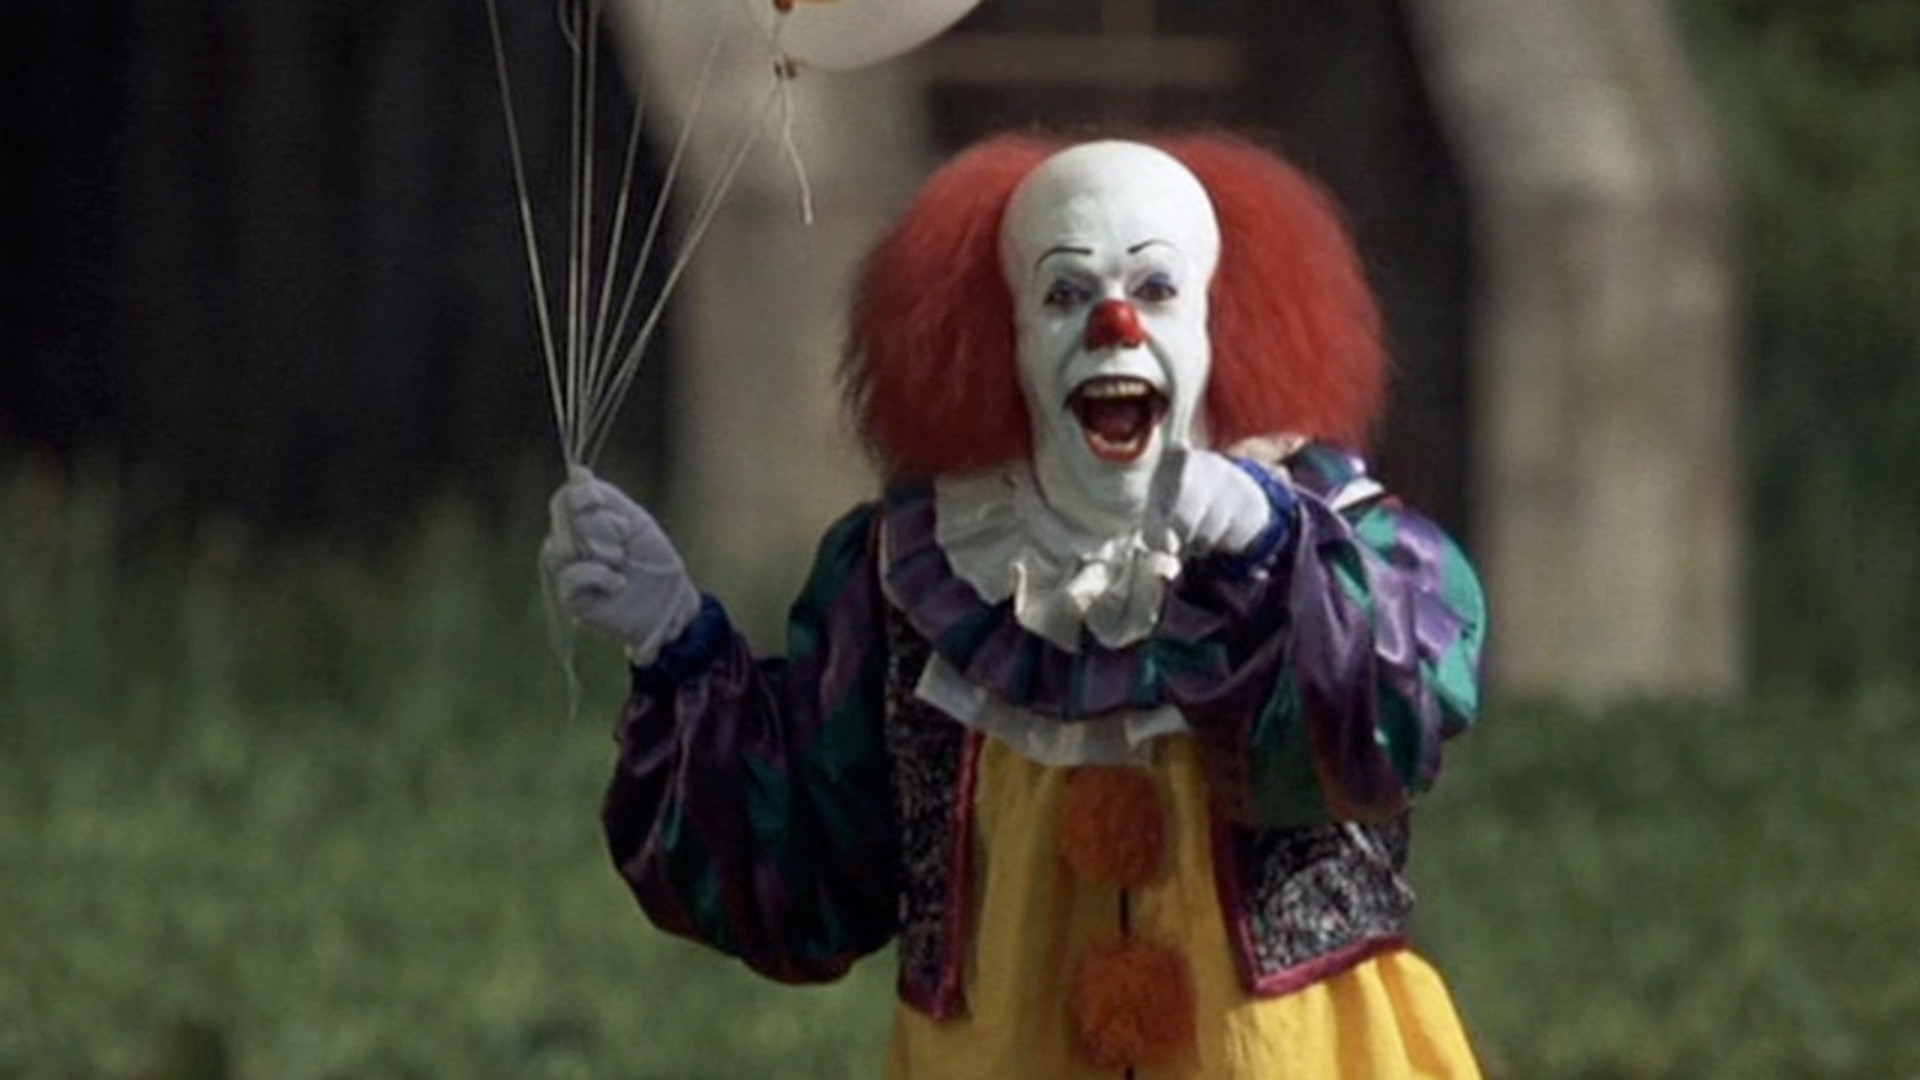 1920x1080 Pennywise the Clown Wallpaper - WallpaperSafari It The Clown Wallpapers -  Wallpaper Cave ...